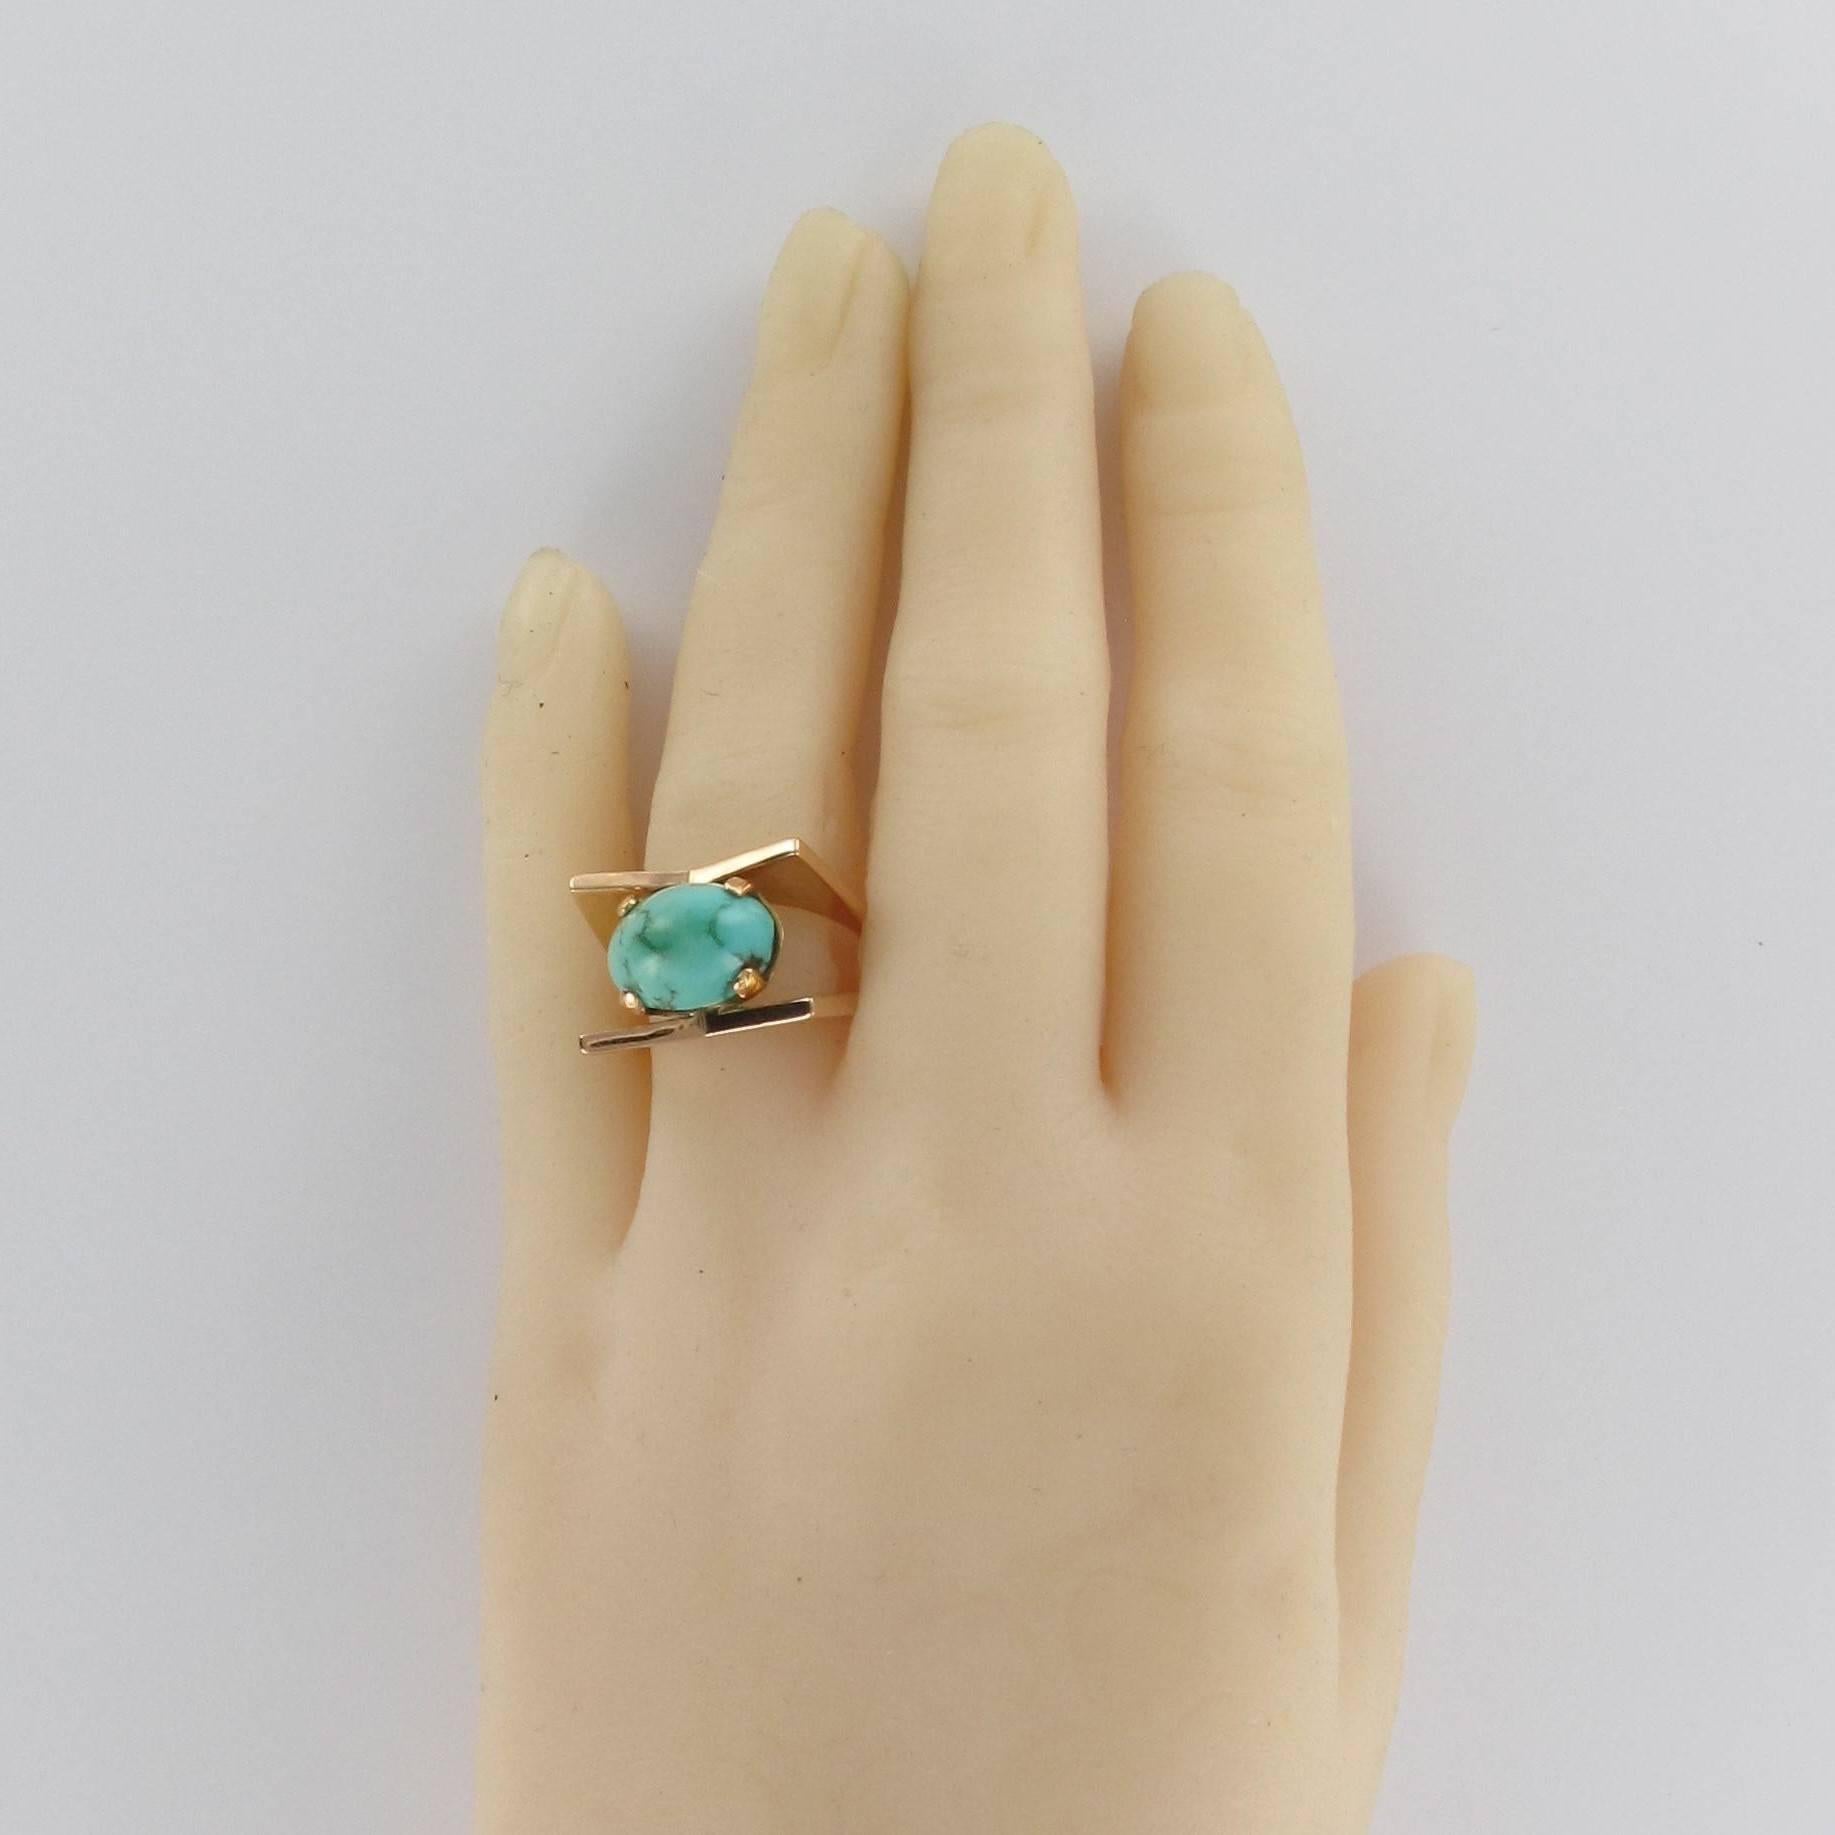 Retro Modernist Turquoise Gold Ring 